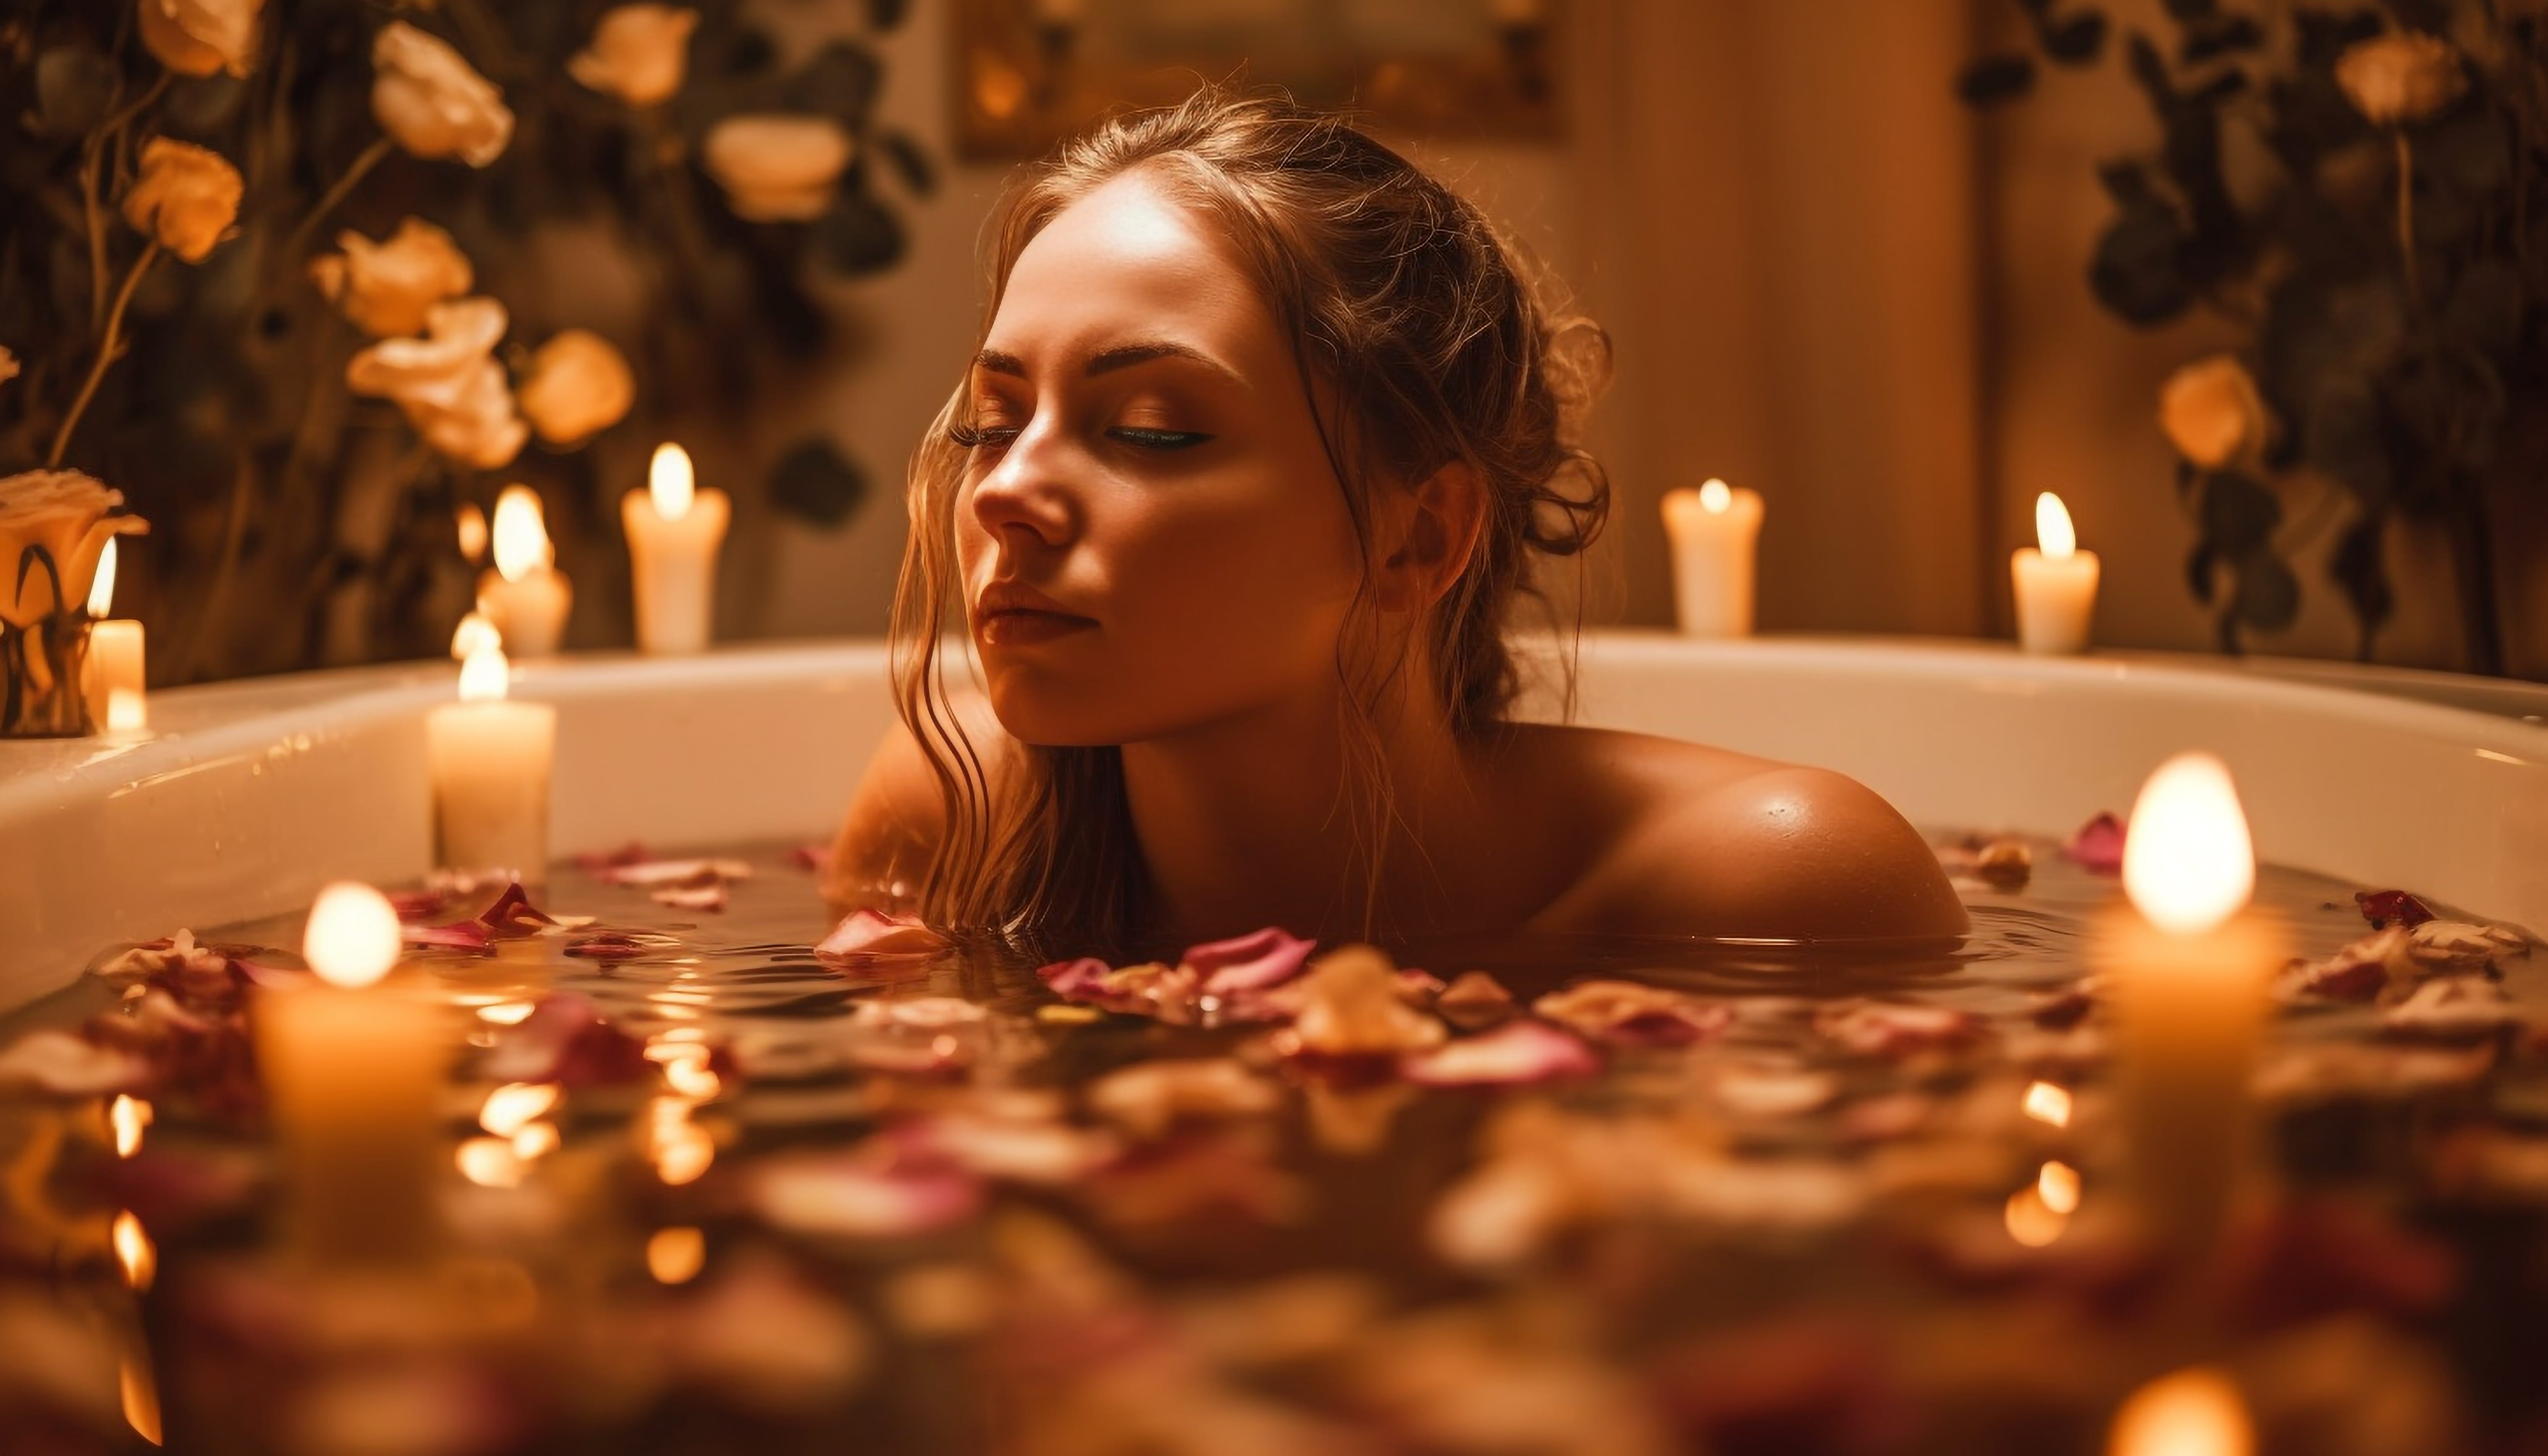 5 Science-Backed Health Benefits of Taking a Bath